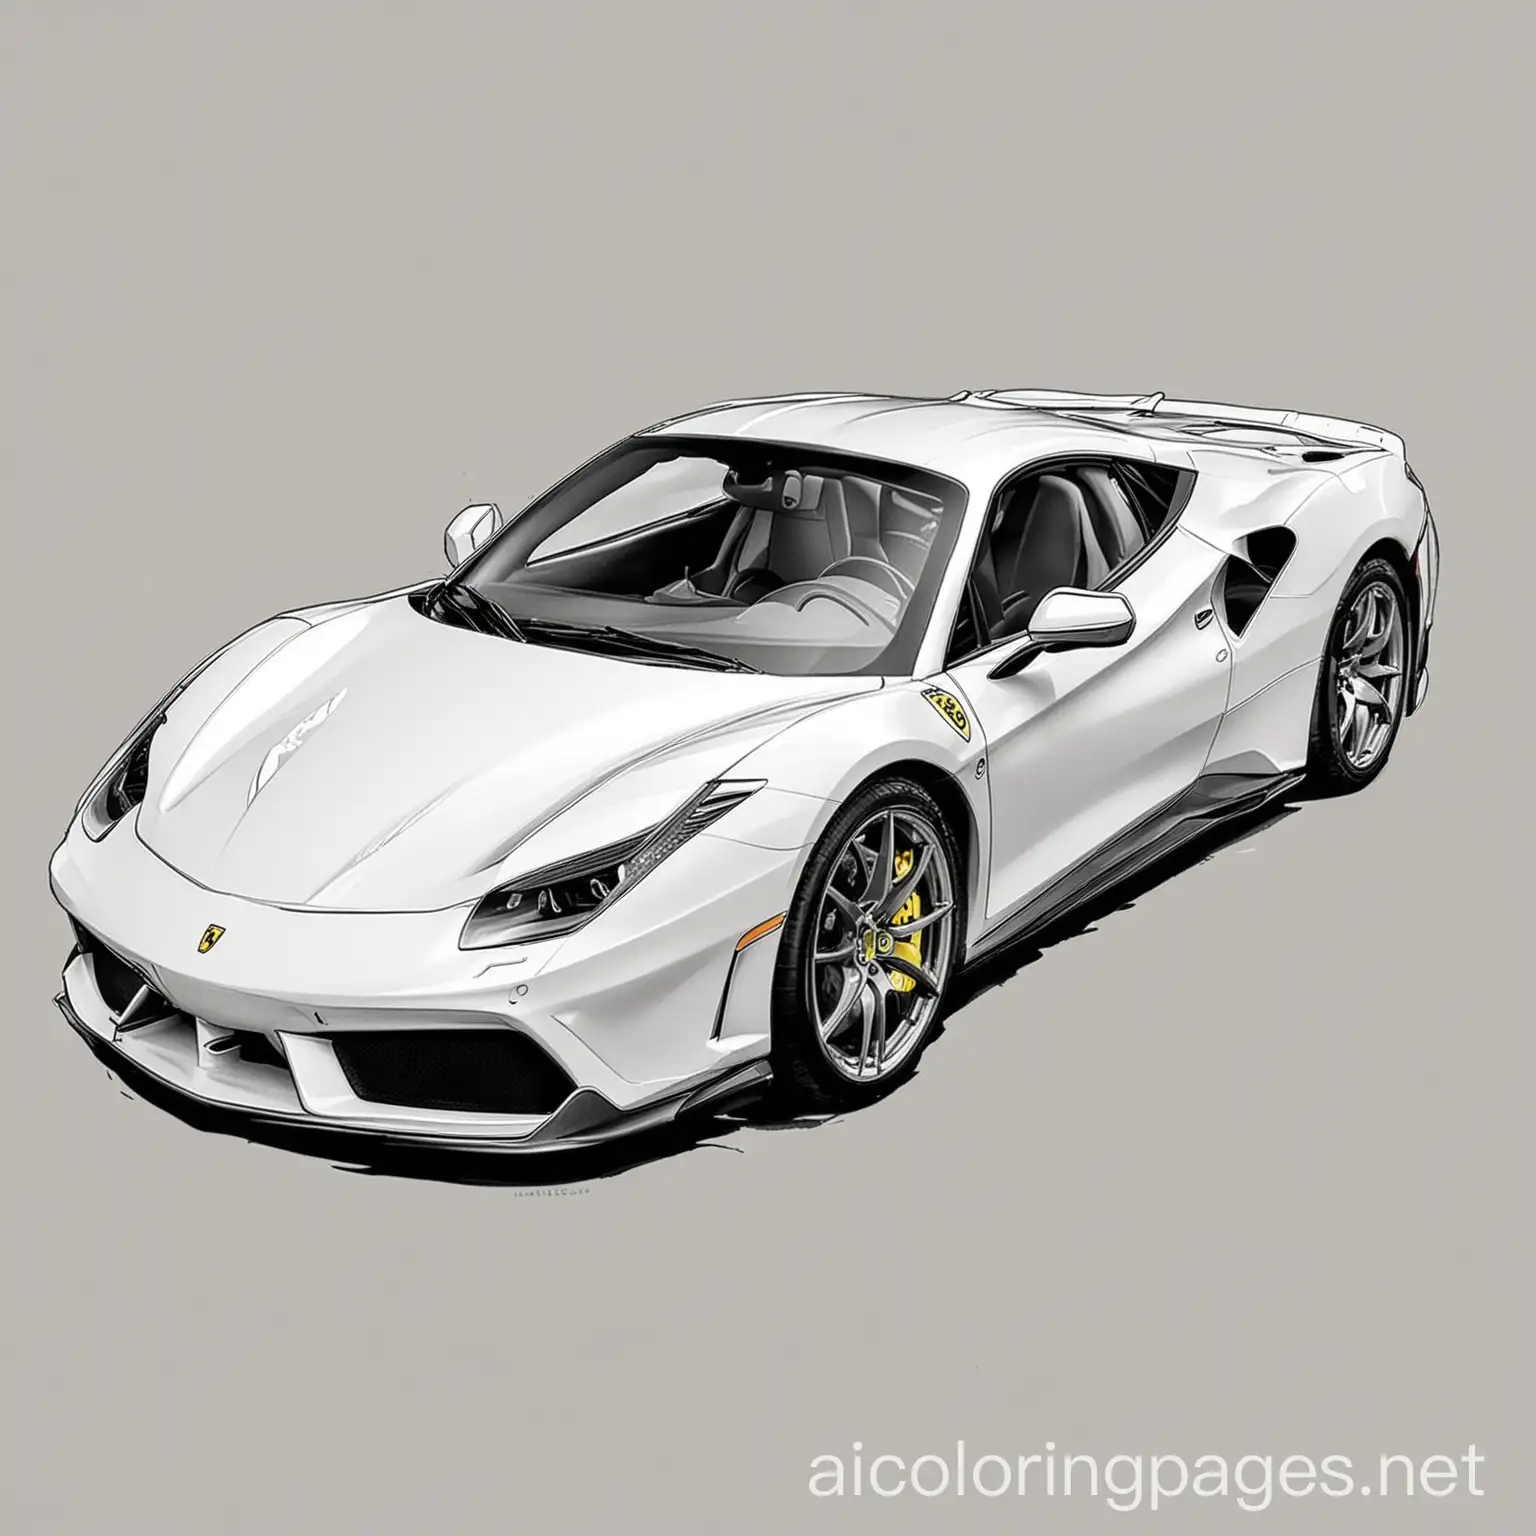 ferari, Coloring Page, black and white, line art, white background, Simplicity, Ample White Space. The background of the coloring page is plain white to make it easy for young children to color within the lines. The outlines of all the subjects are easy to distinguish, making it simple for kids to color without too much difficulty